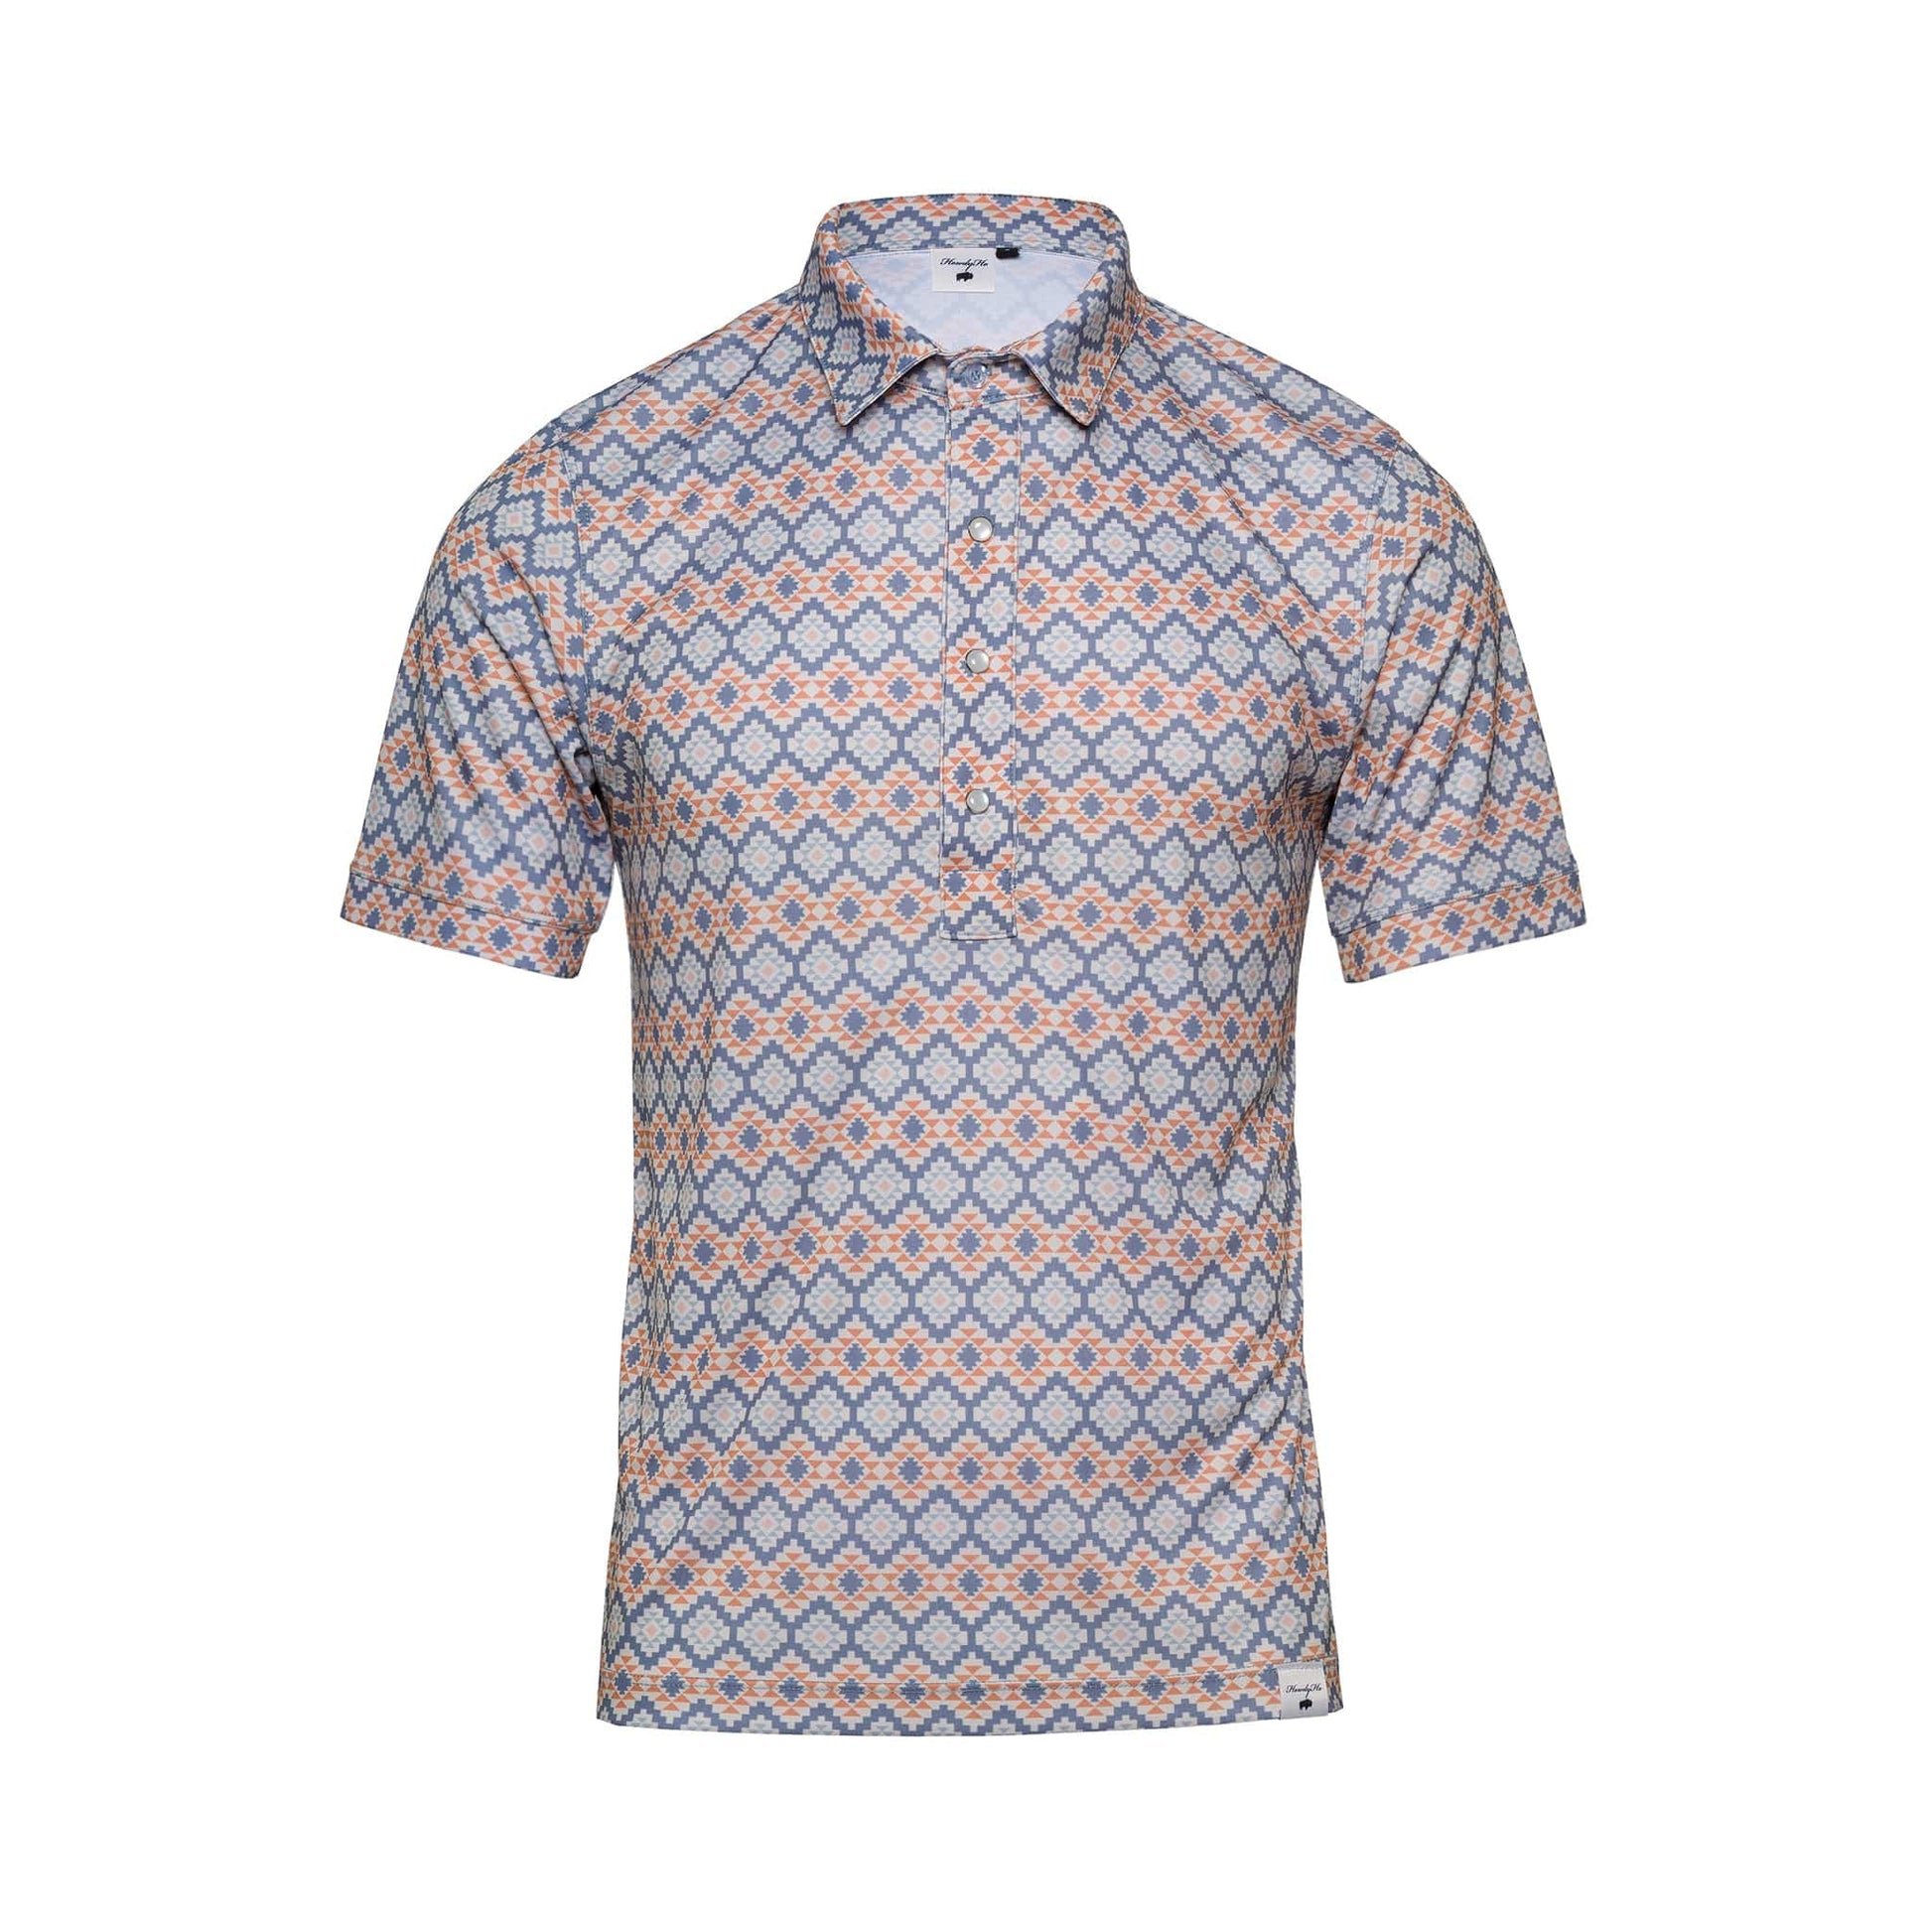 This is the HowdyHo Aztec Twilight shirt, featuring a sophisticated geometric pattern in shades of blue and orange. The shirt has short sleeves, a sharp collar, and a front button placket. Its intricate print and tailored fit make it a versatile addition to a contemporary wardrobe, ideal for both casual and smart-casual settings.